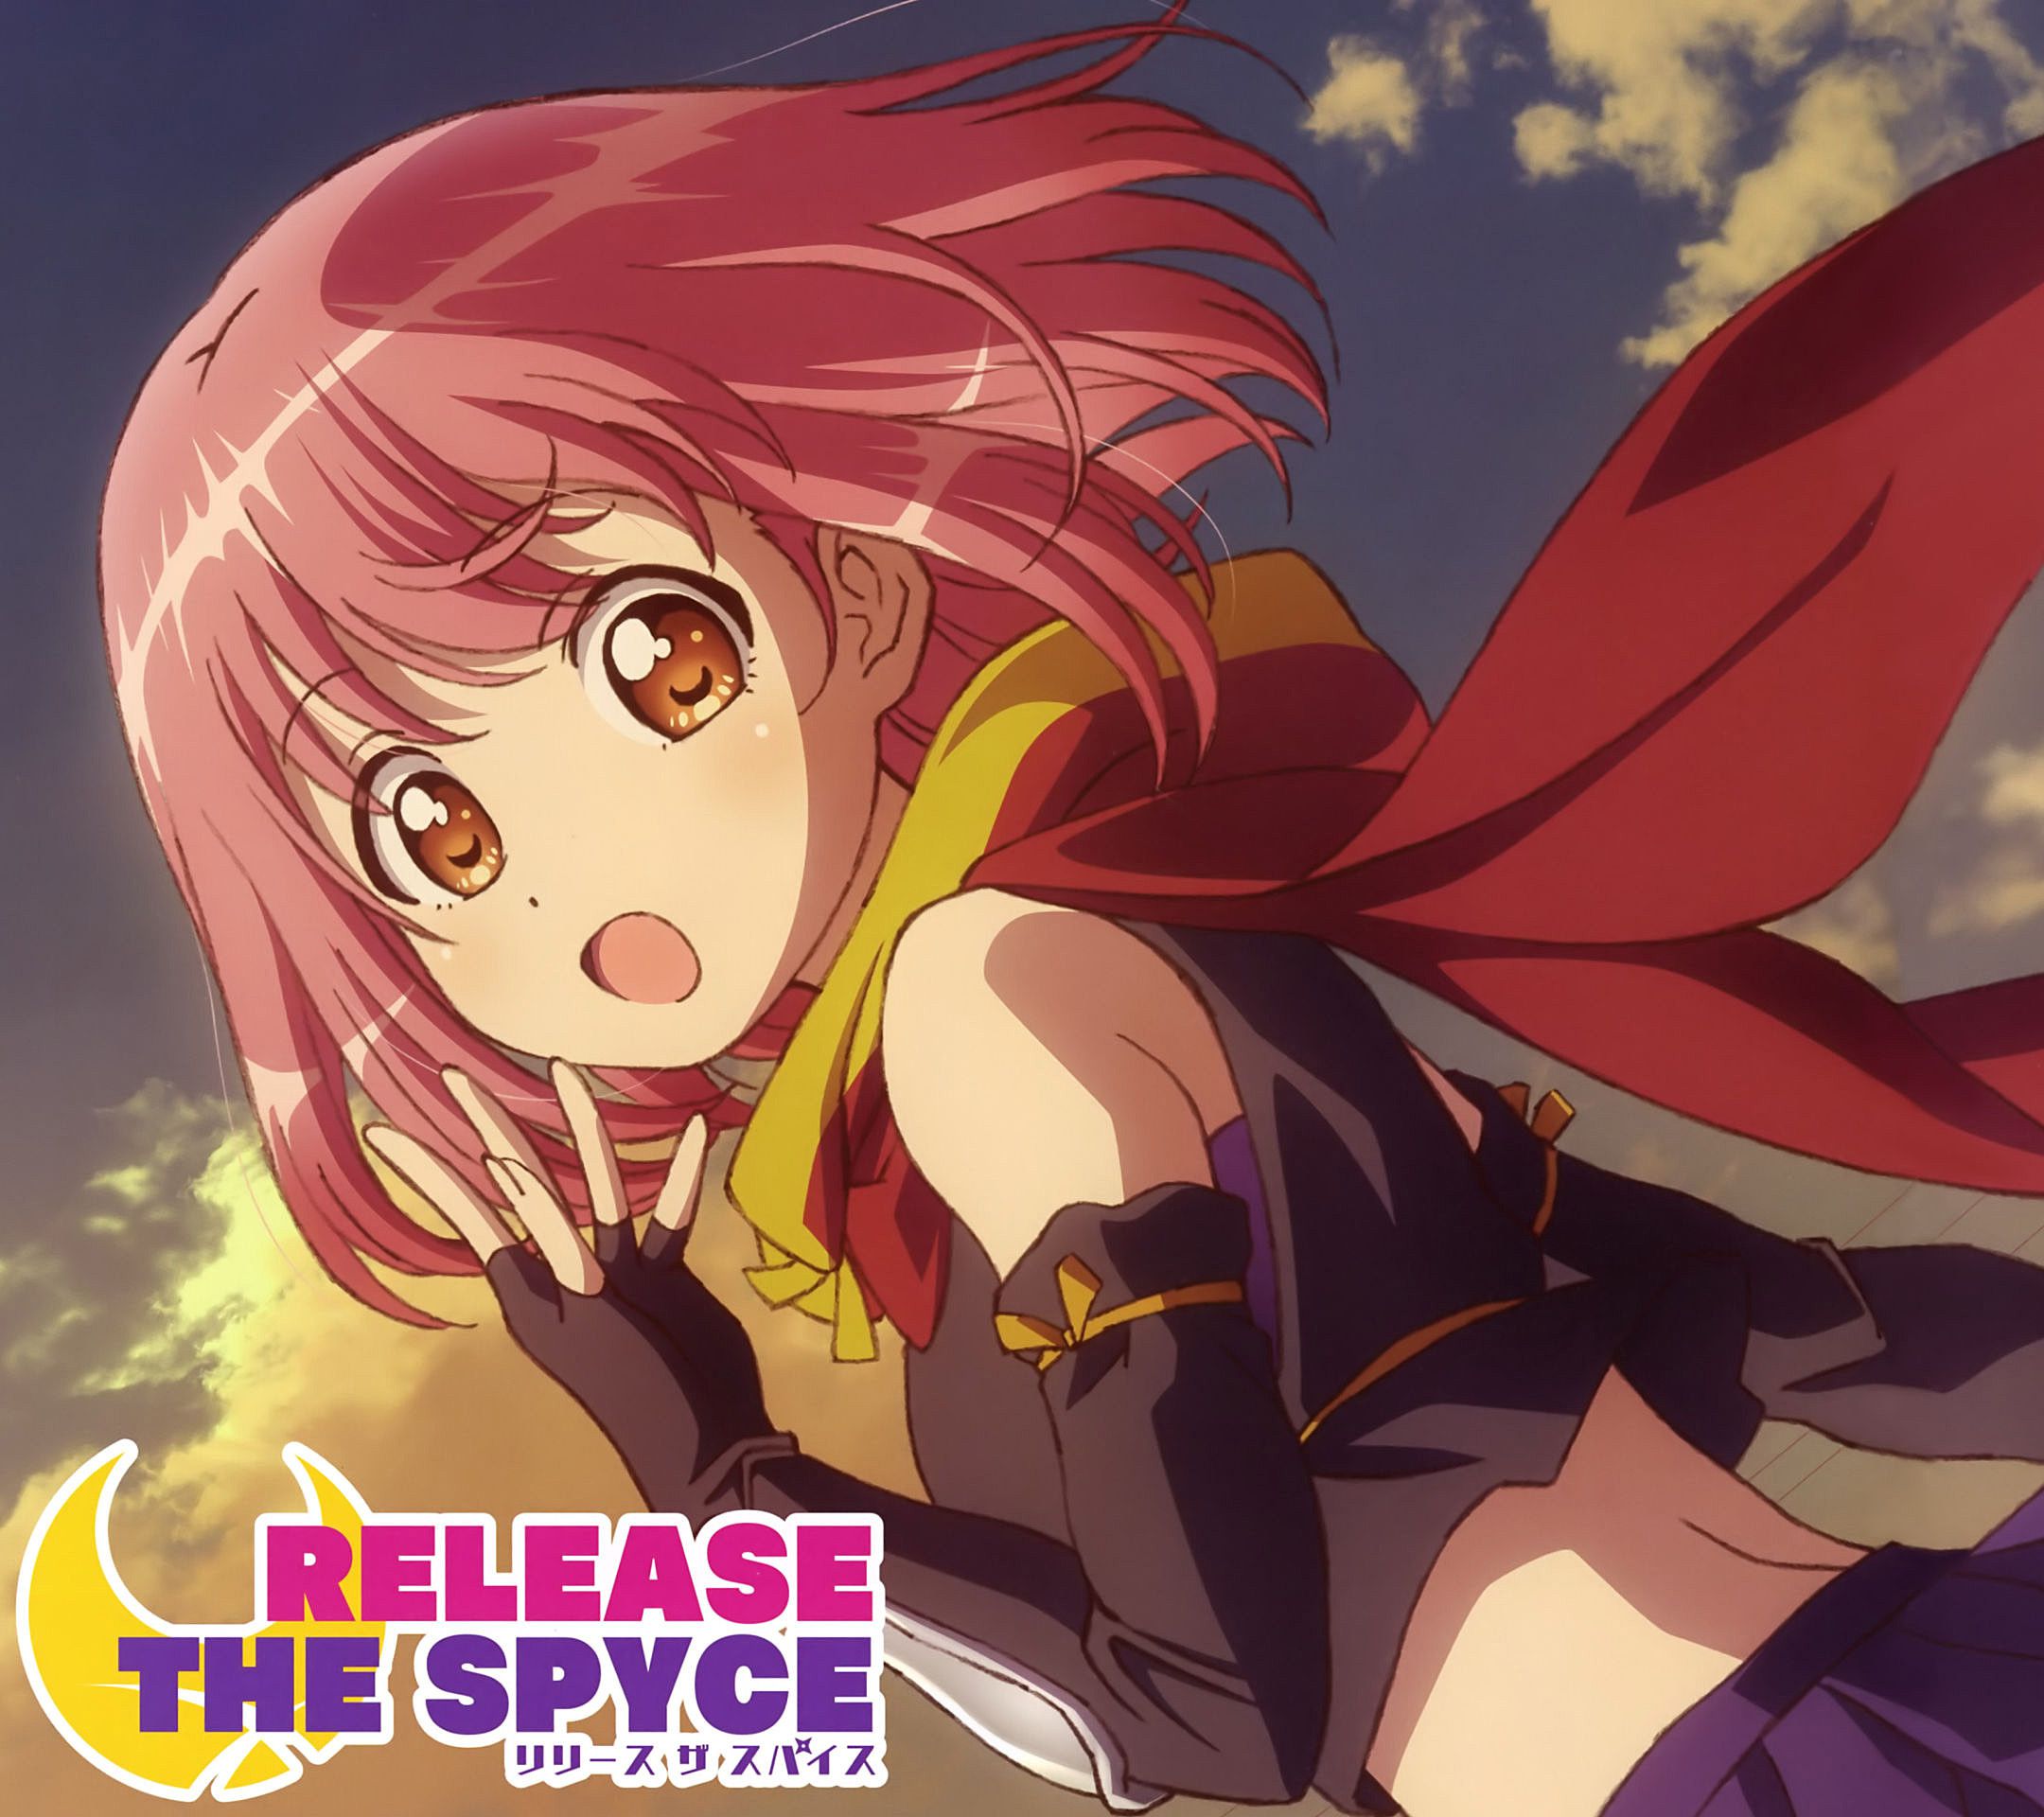 Release The Spyce リリスパ Androidスマホ壁紙画像 2160 19他 1 アニメ壁紙ネット Pc Android Iphone壁紙 画像